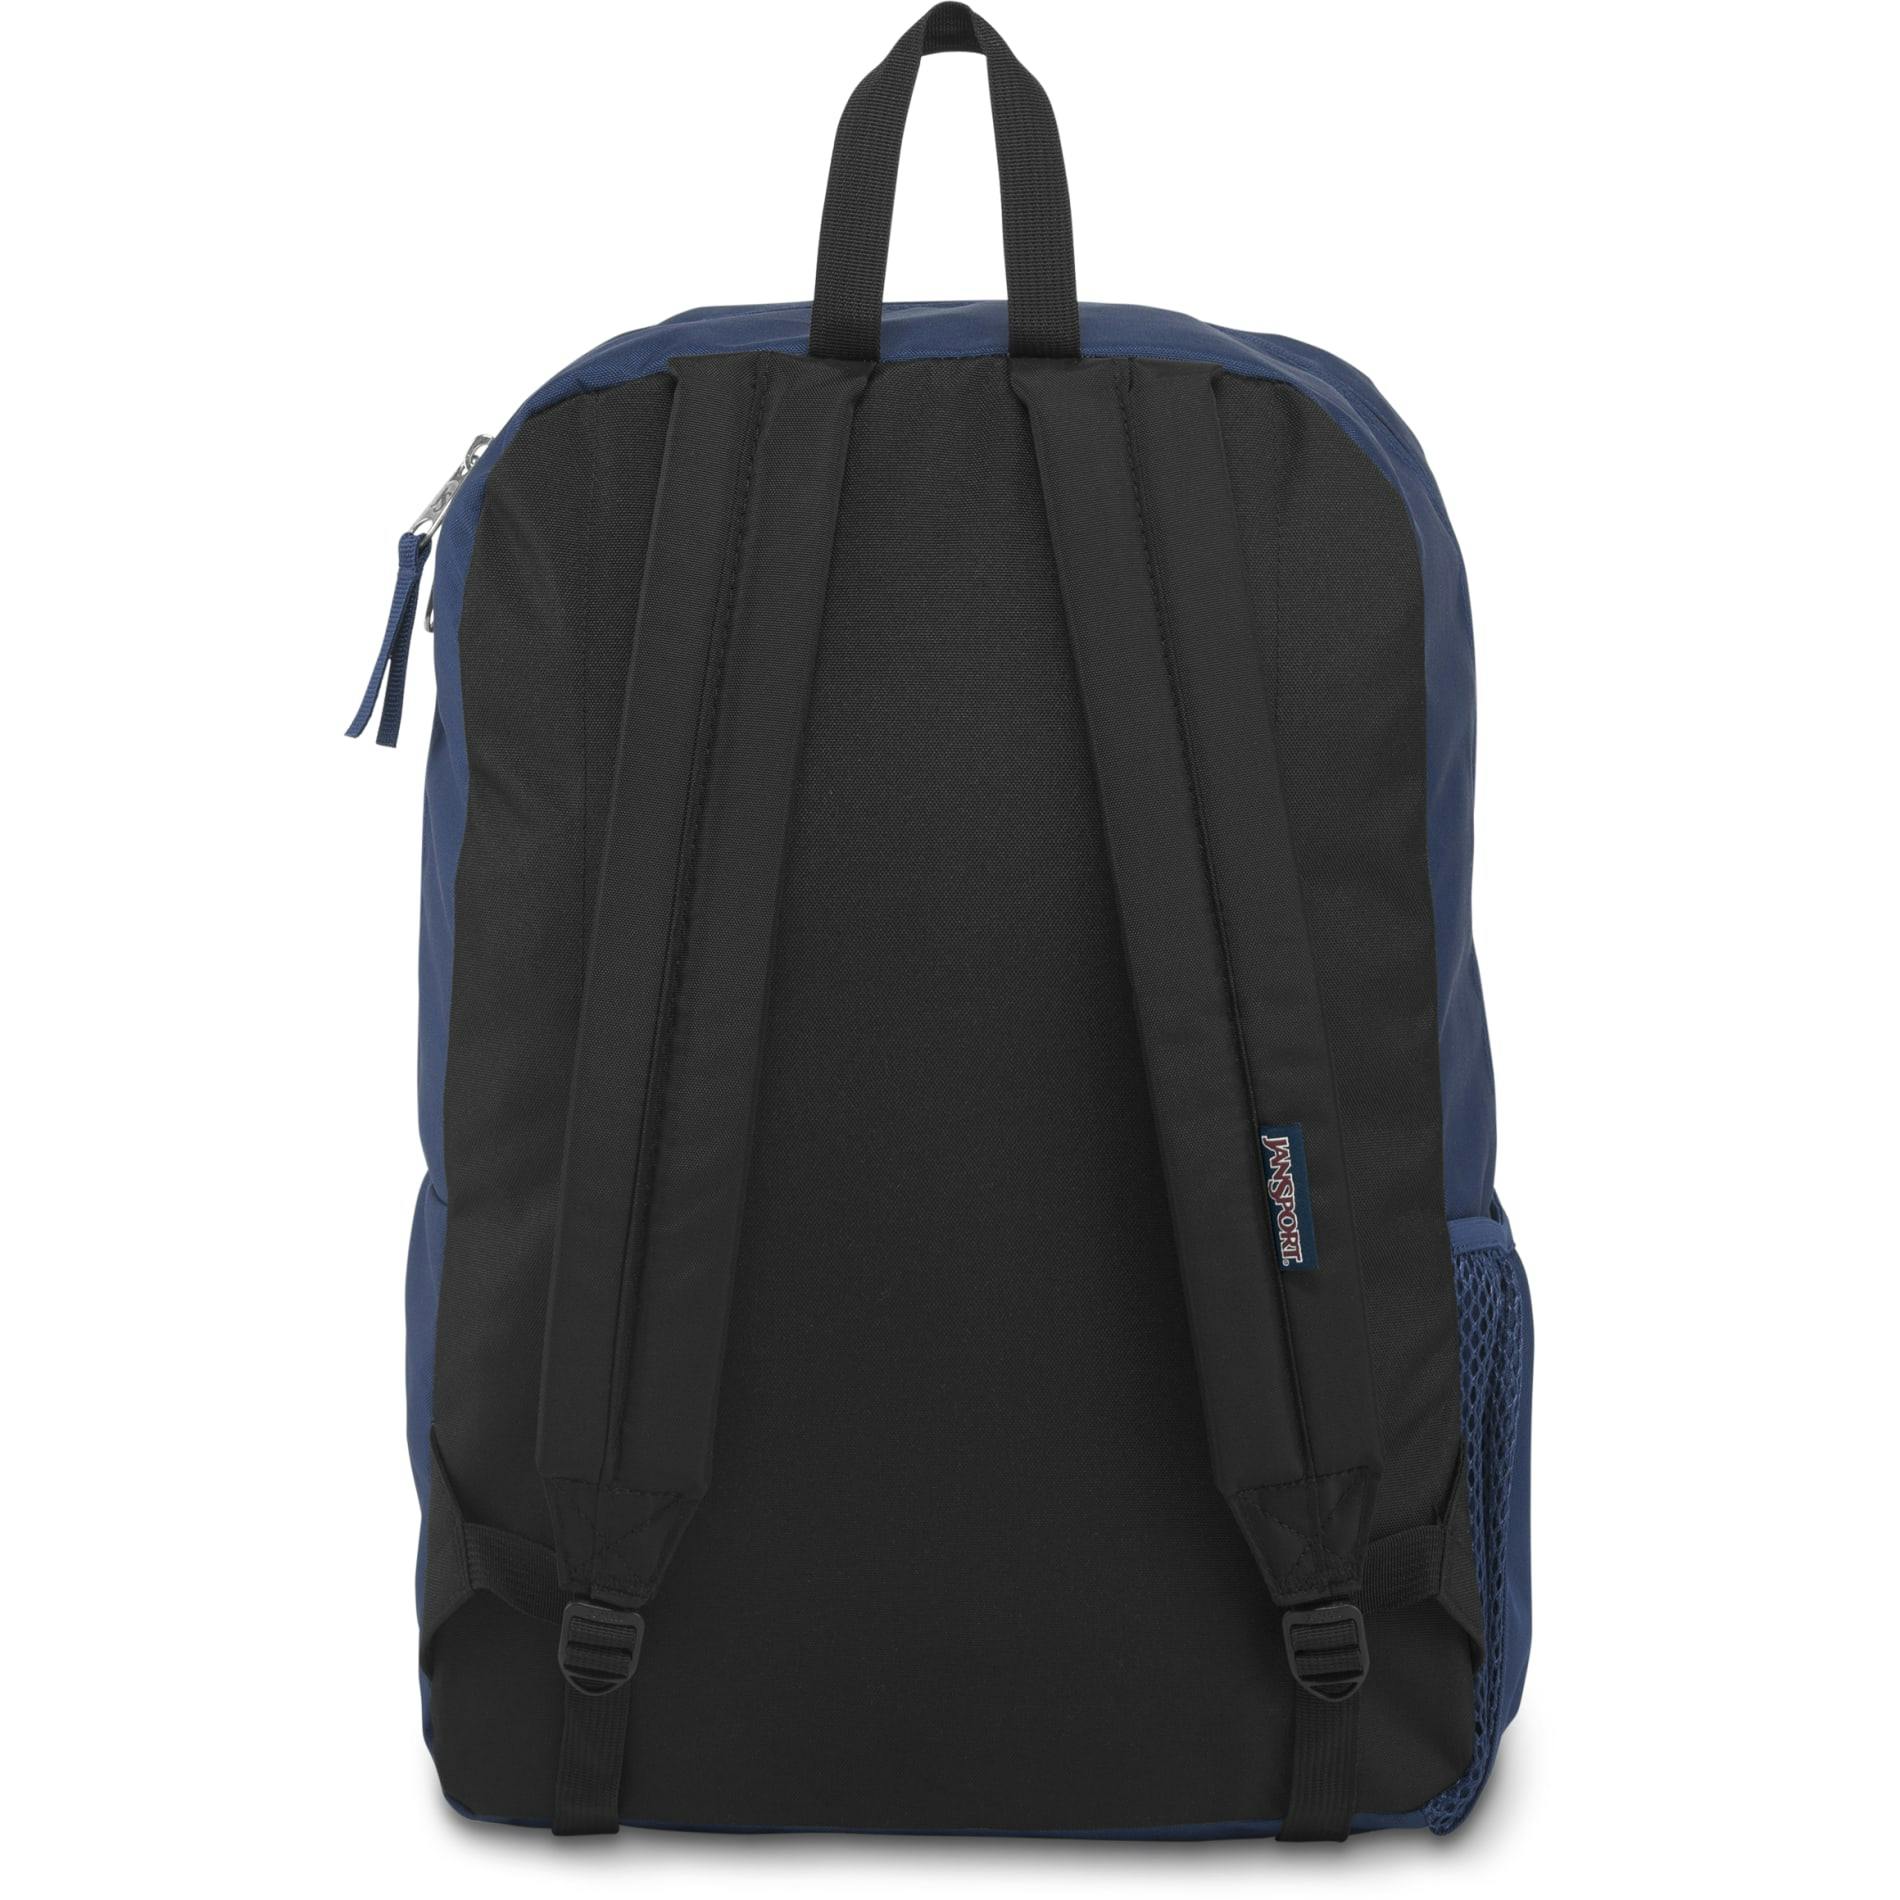 JanSport Crosstown Backpack - additional Image 1